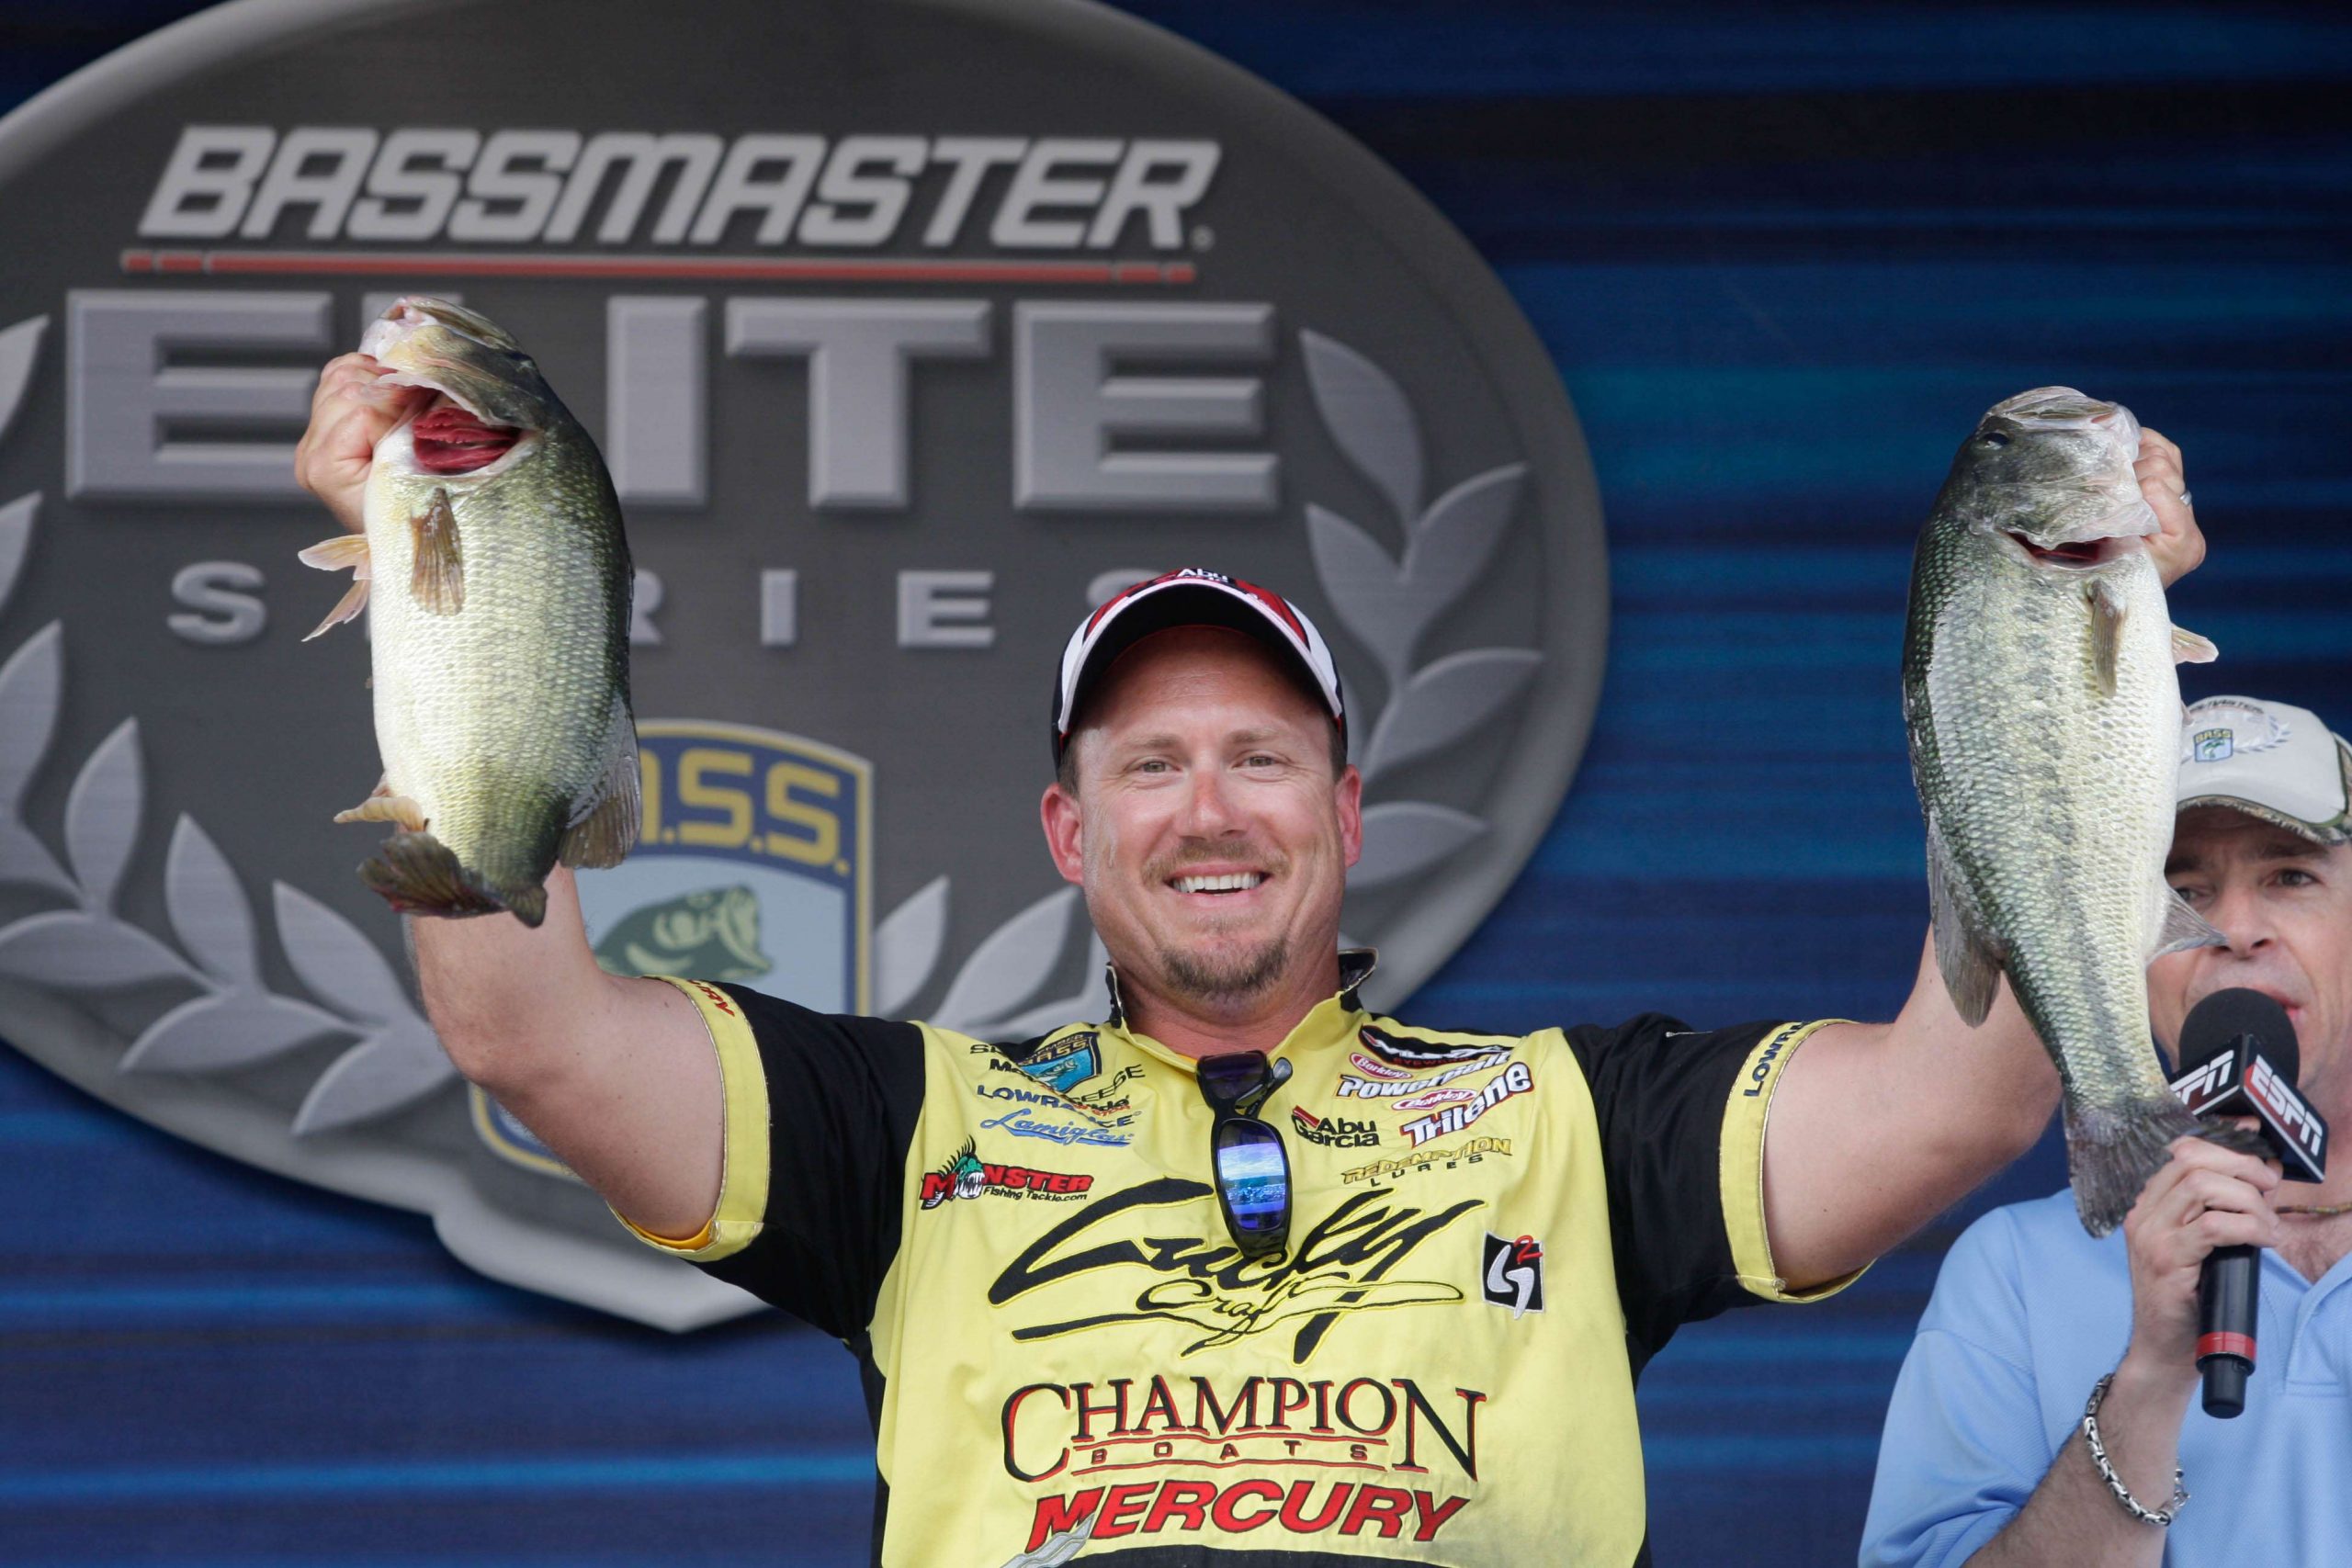 Reese caught more than 500 bass in the four-day tournament, releasing multiple 5-pounders that wouldn't improve his weight.